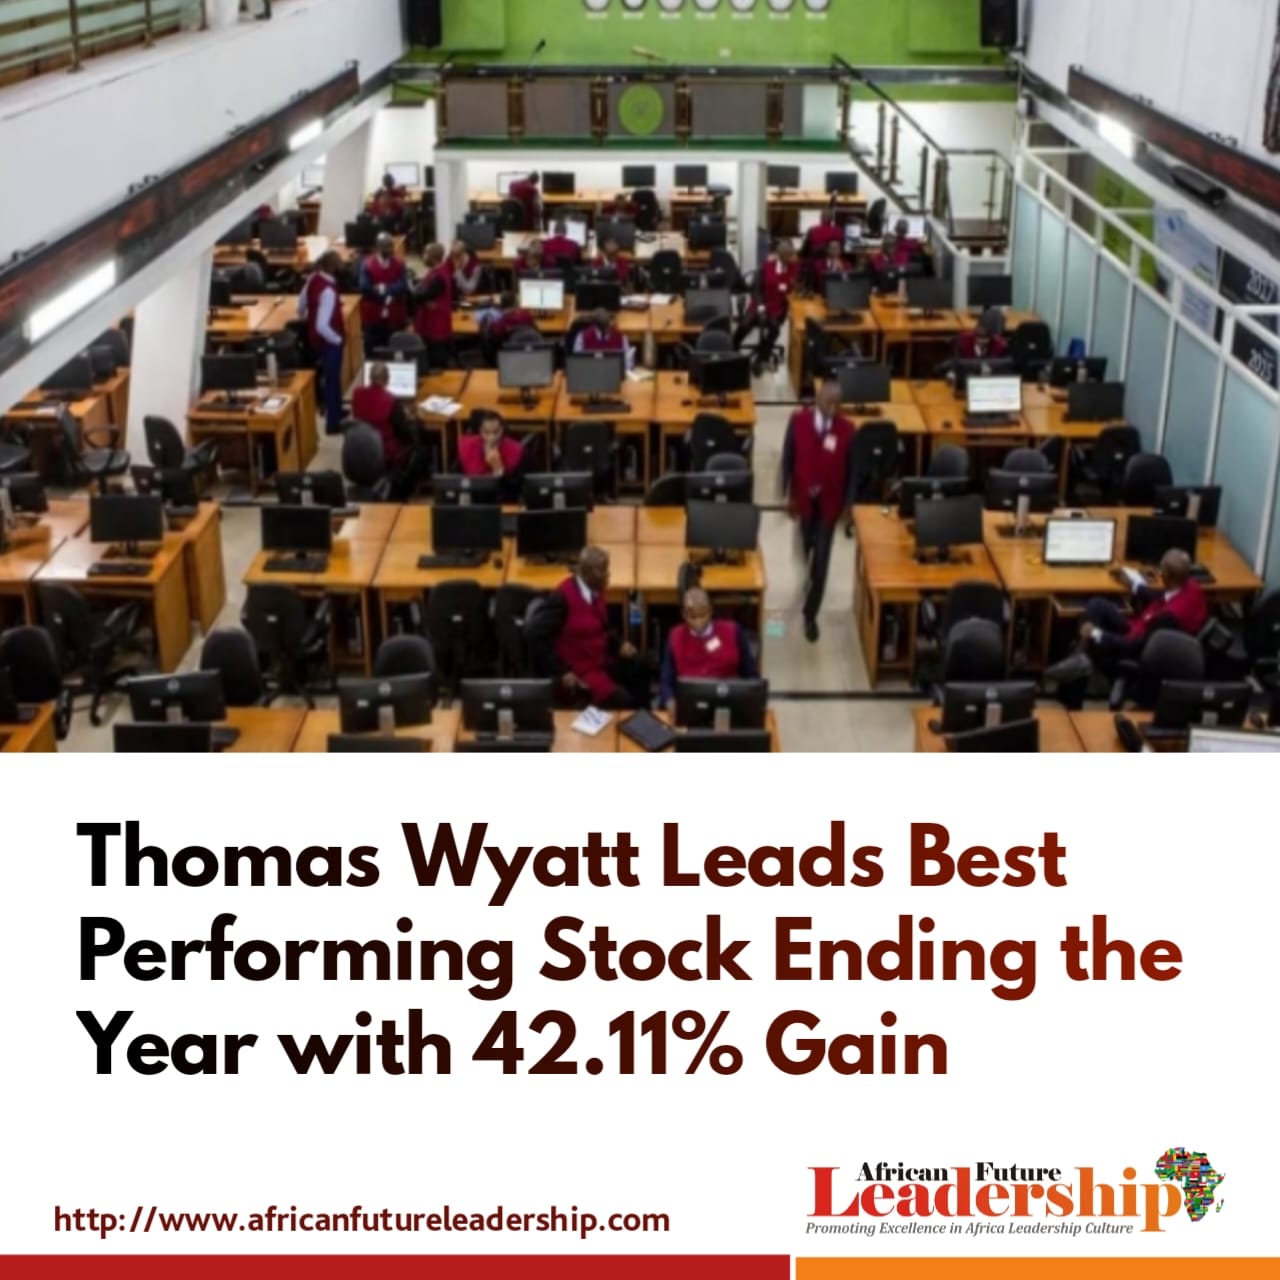 Thomas Wyatt Leads Best Performing Stock Ending the Year with 42.11% Gain